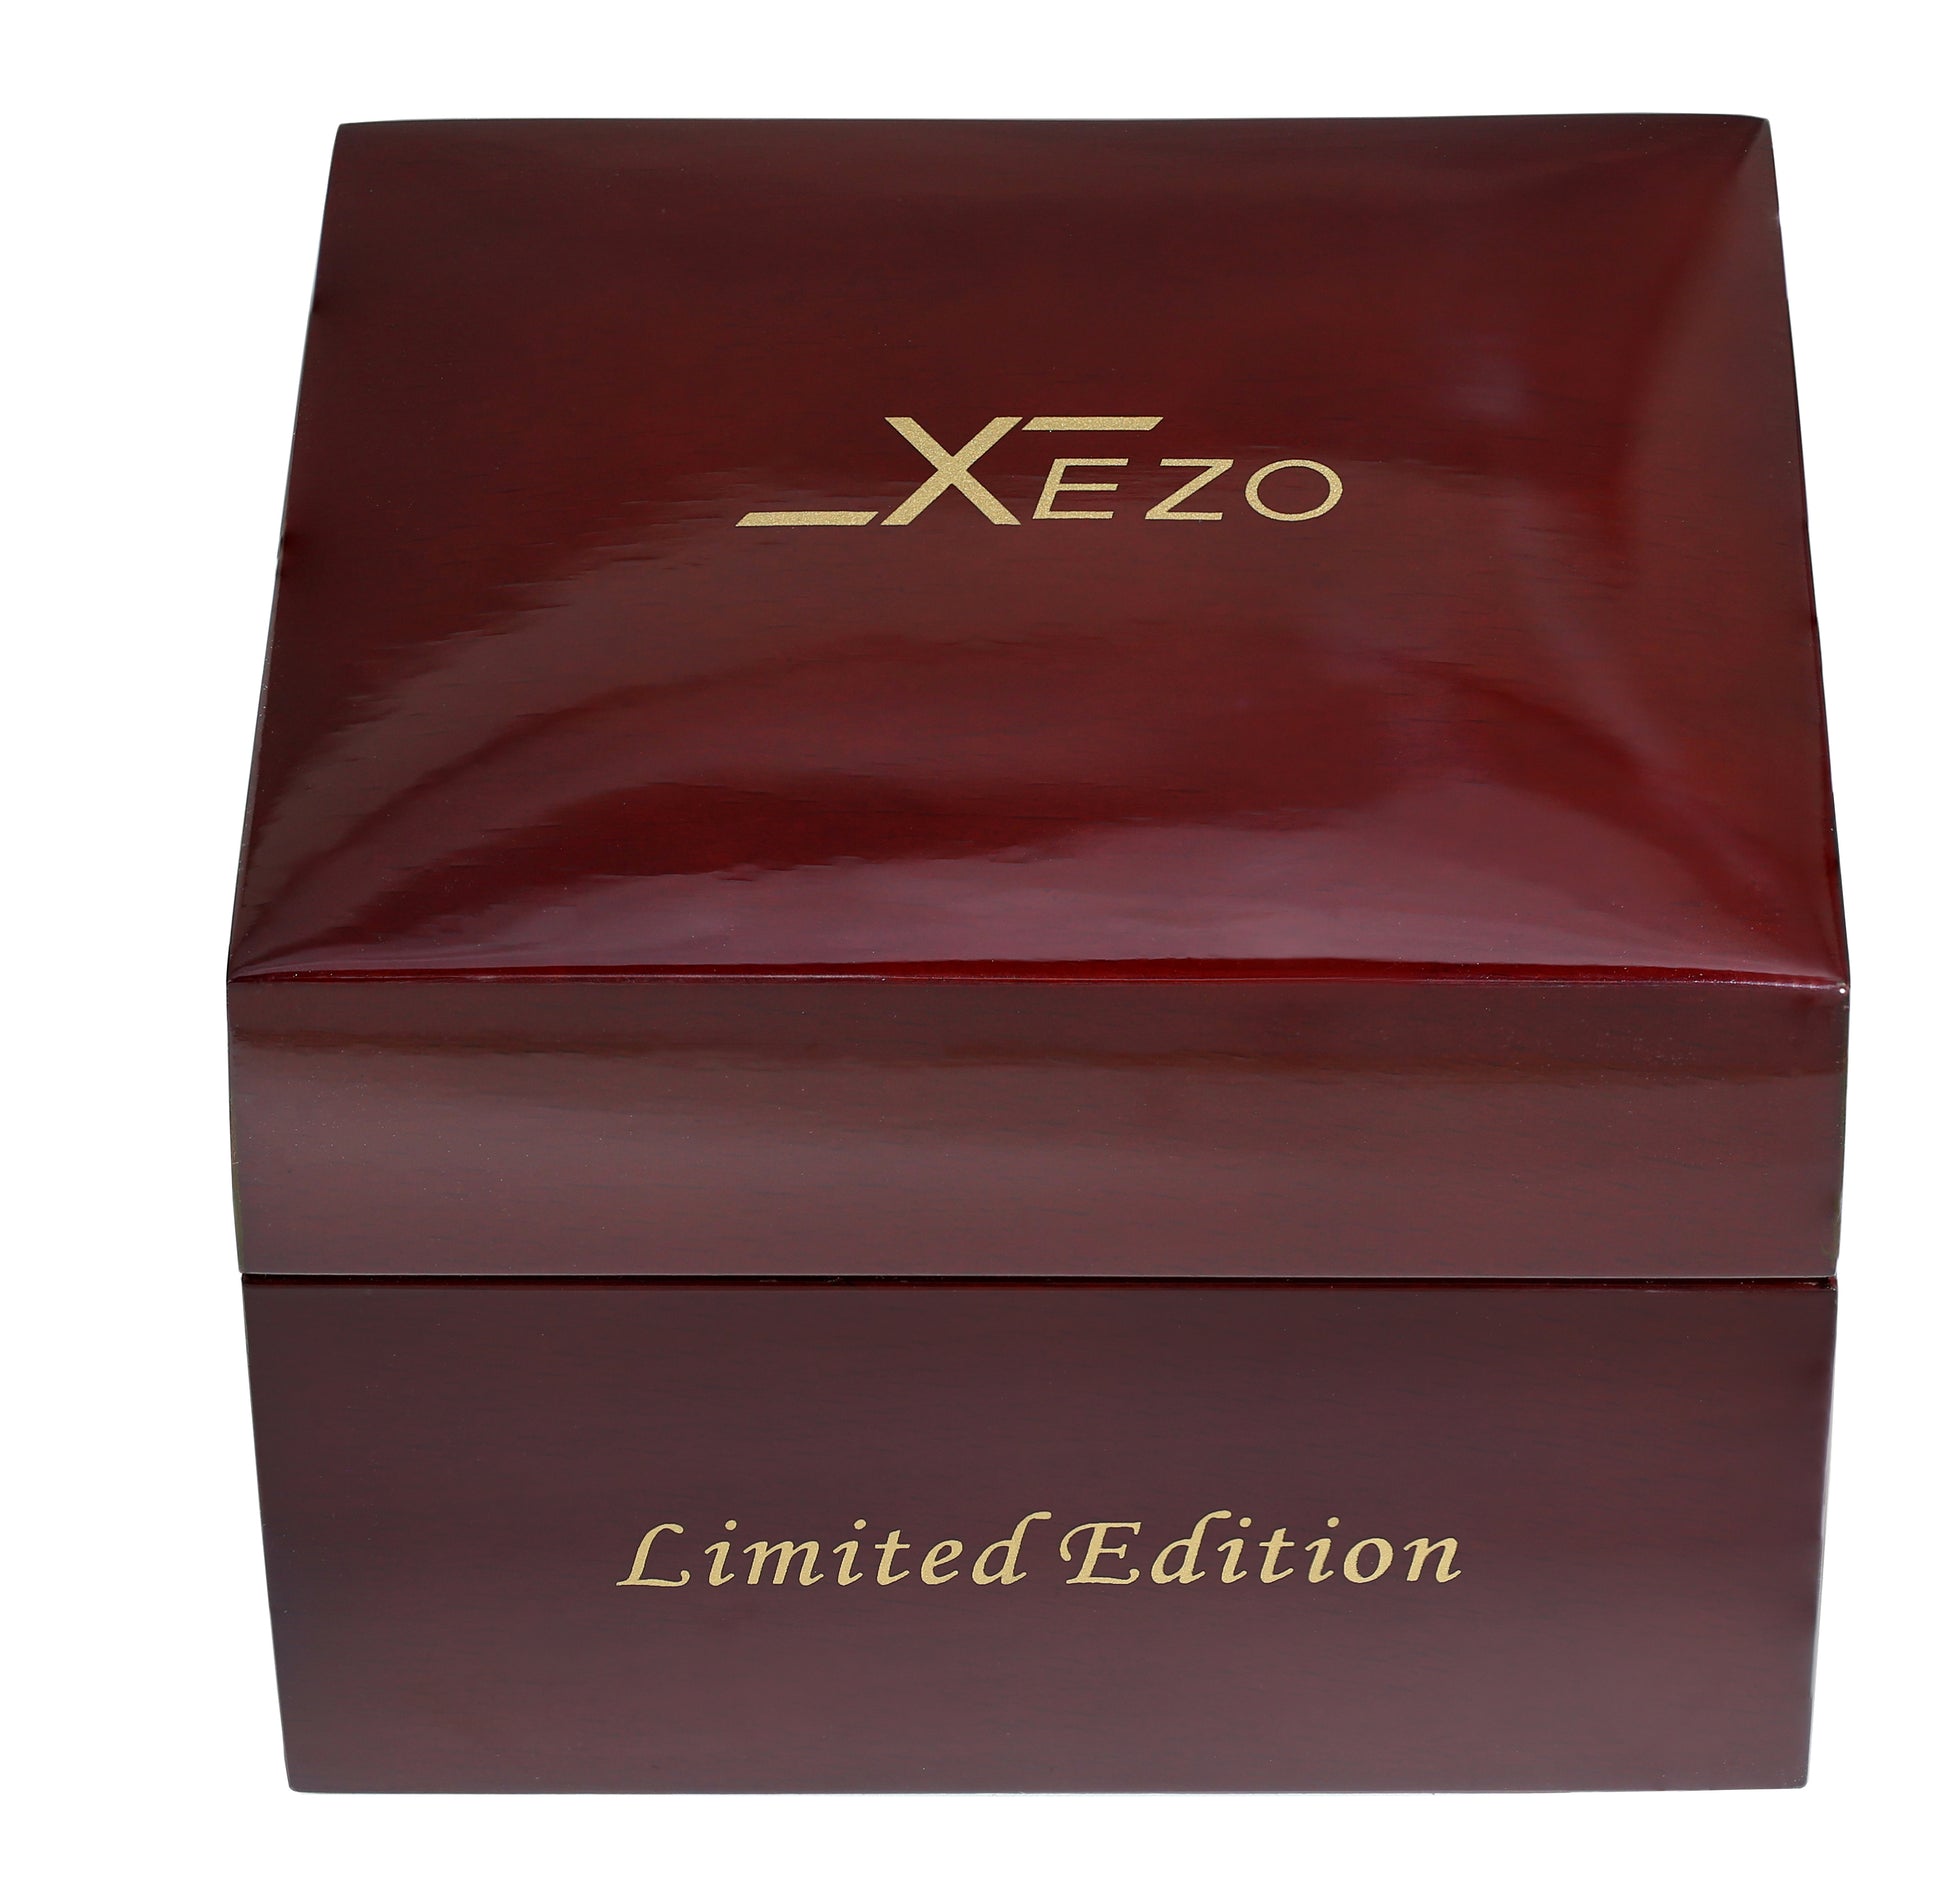 Xezo - Brown birch wooden gift box of the Air Commando D45 7750-1 watch with Xezo logo printed on top and "Limited Edition" printed on the front